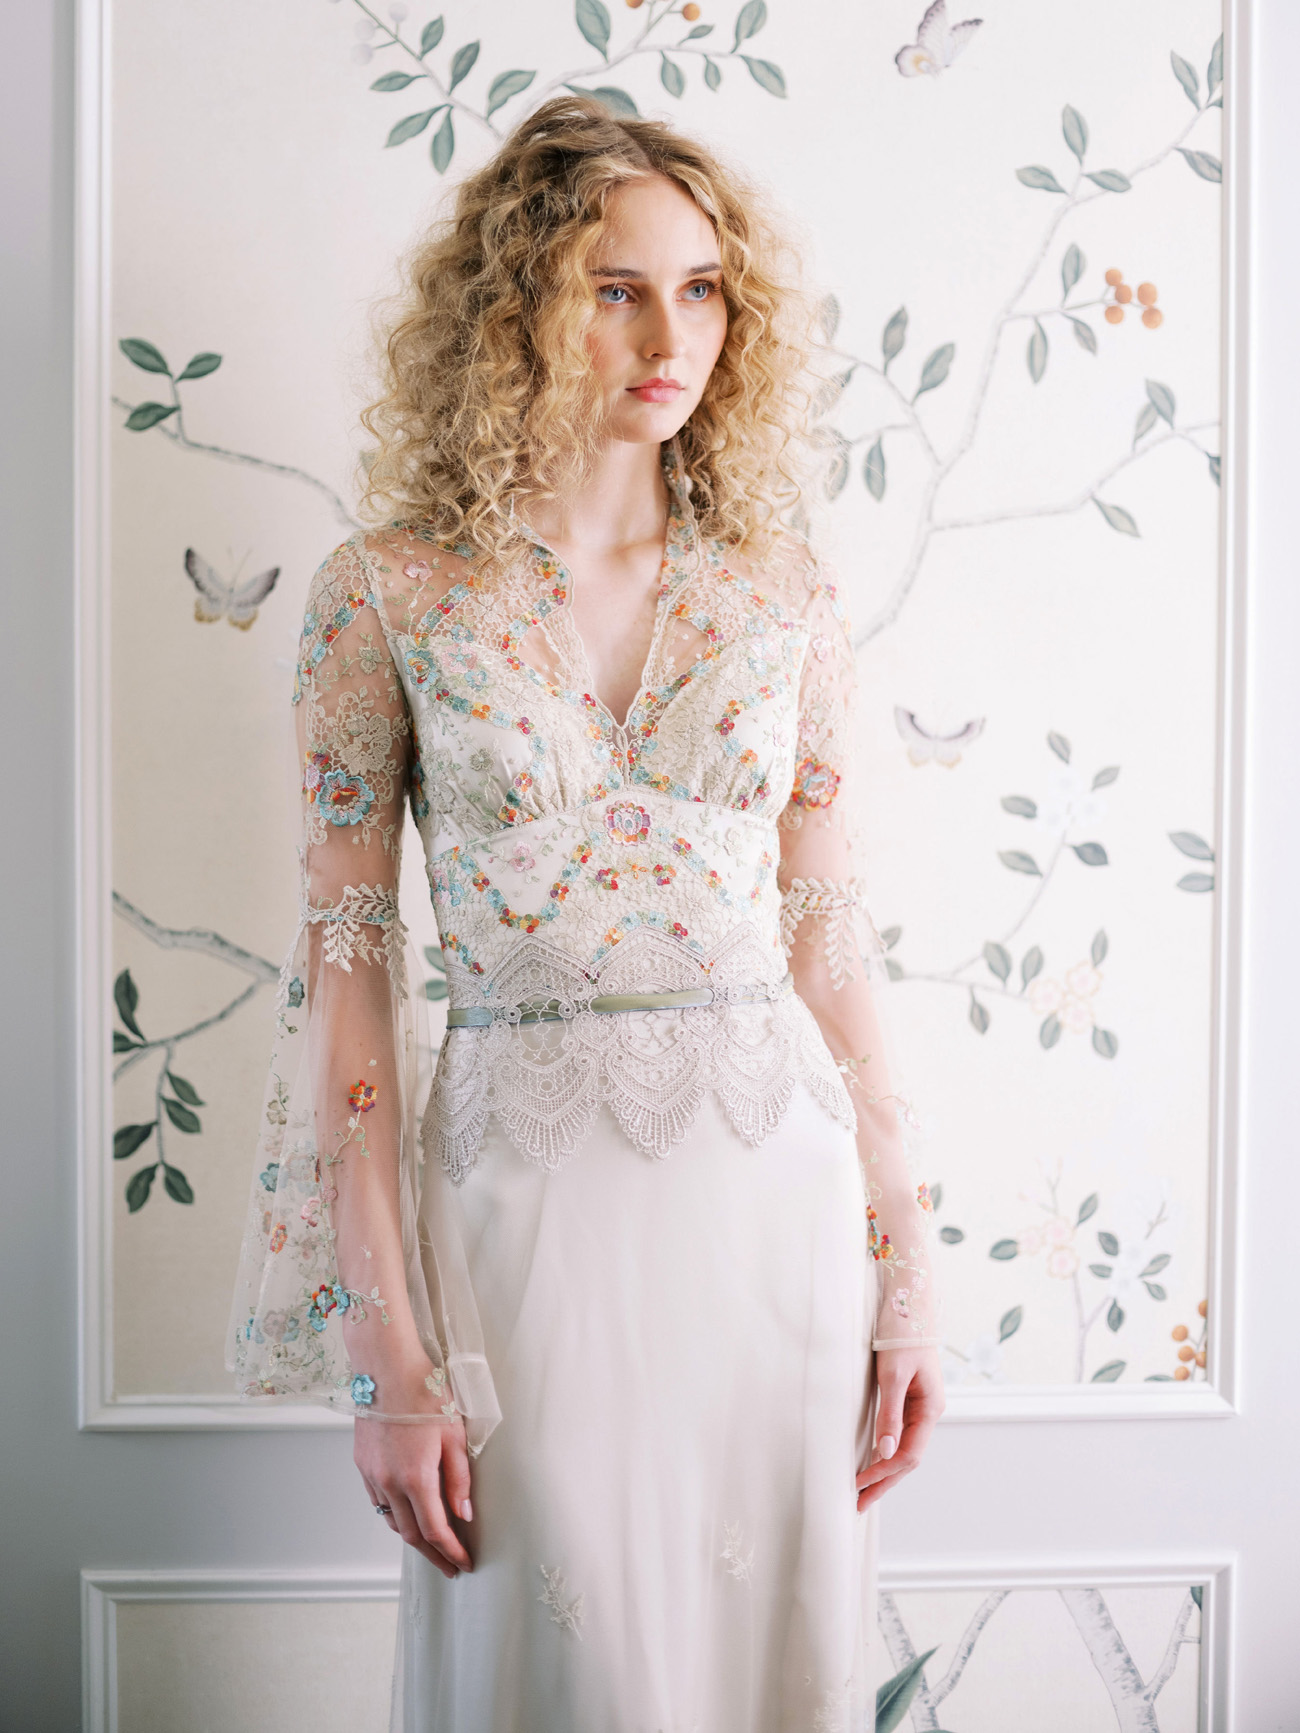 Embroidered wedding dress with rainbow flowers